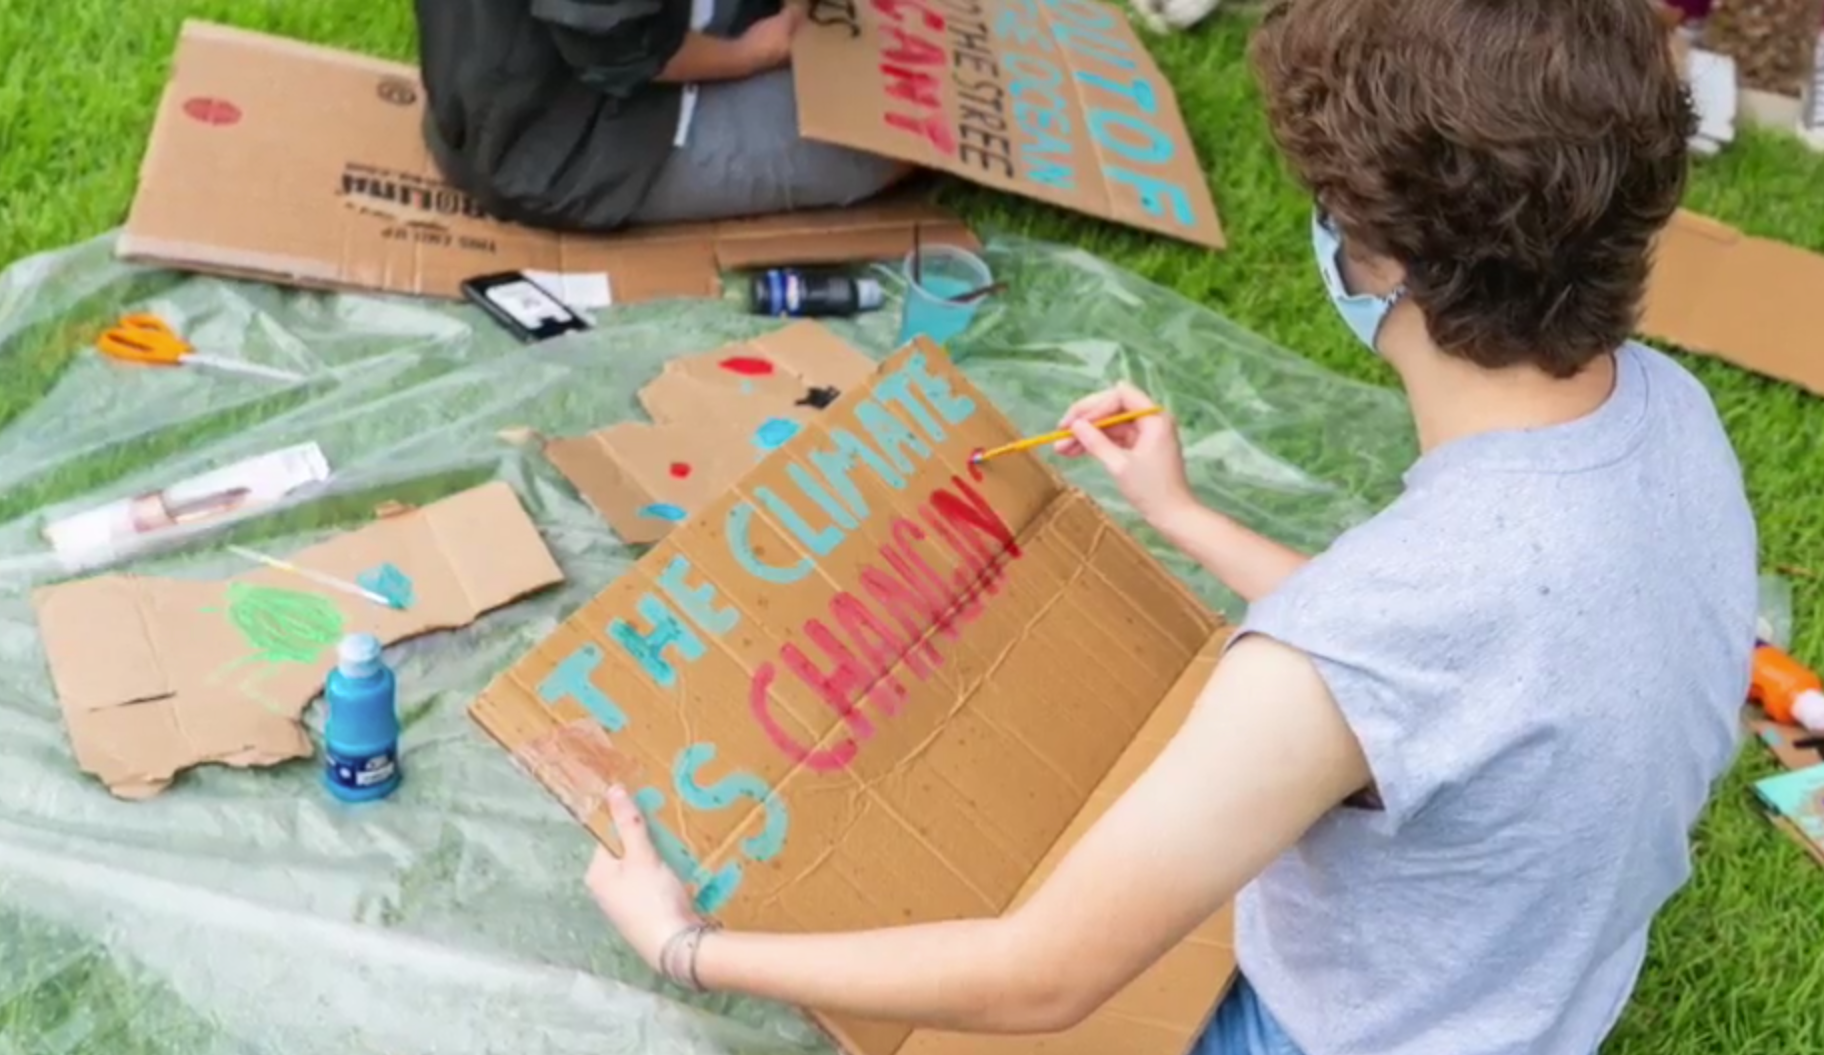 a student creating a sign at a climate change rally event